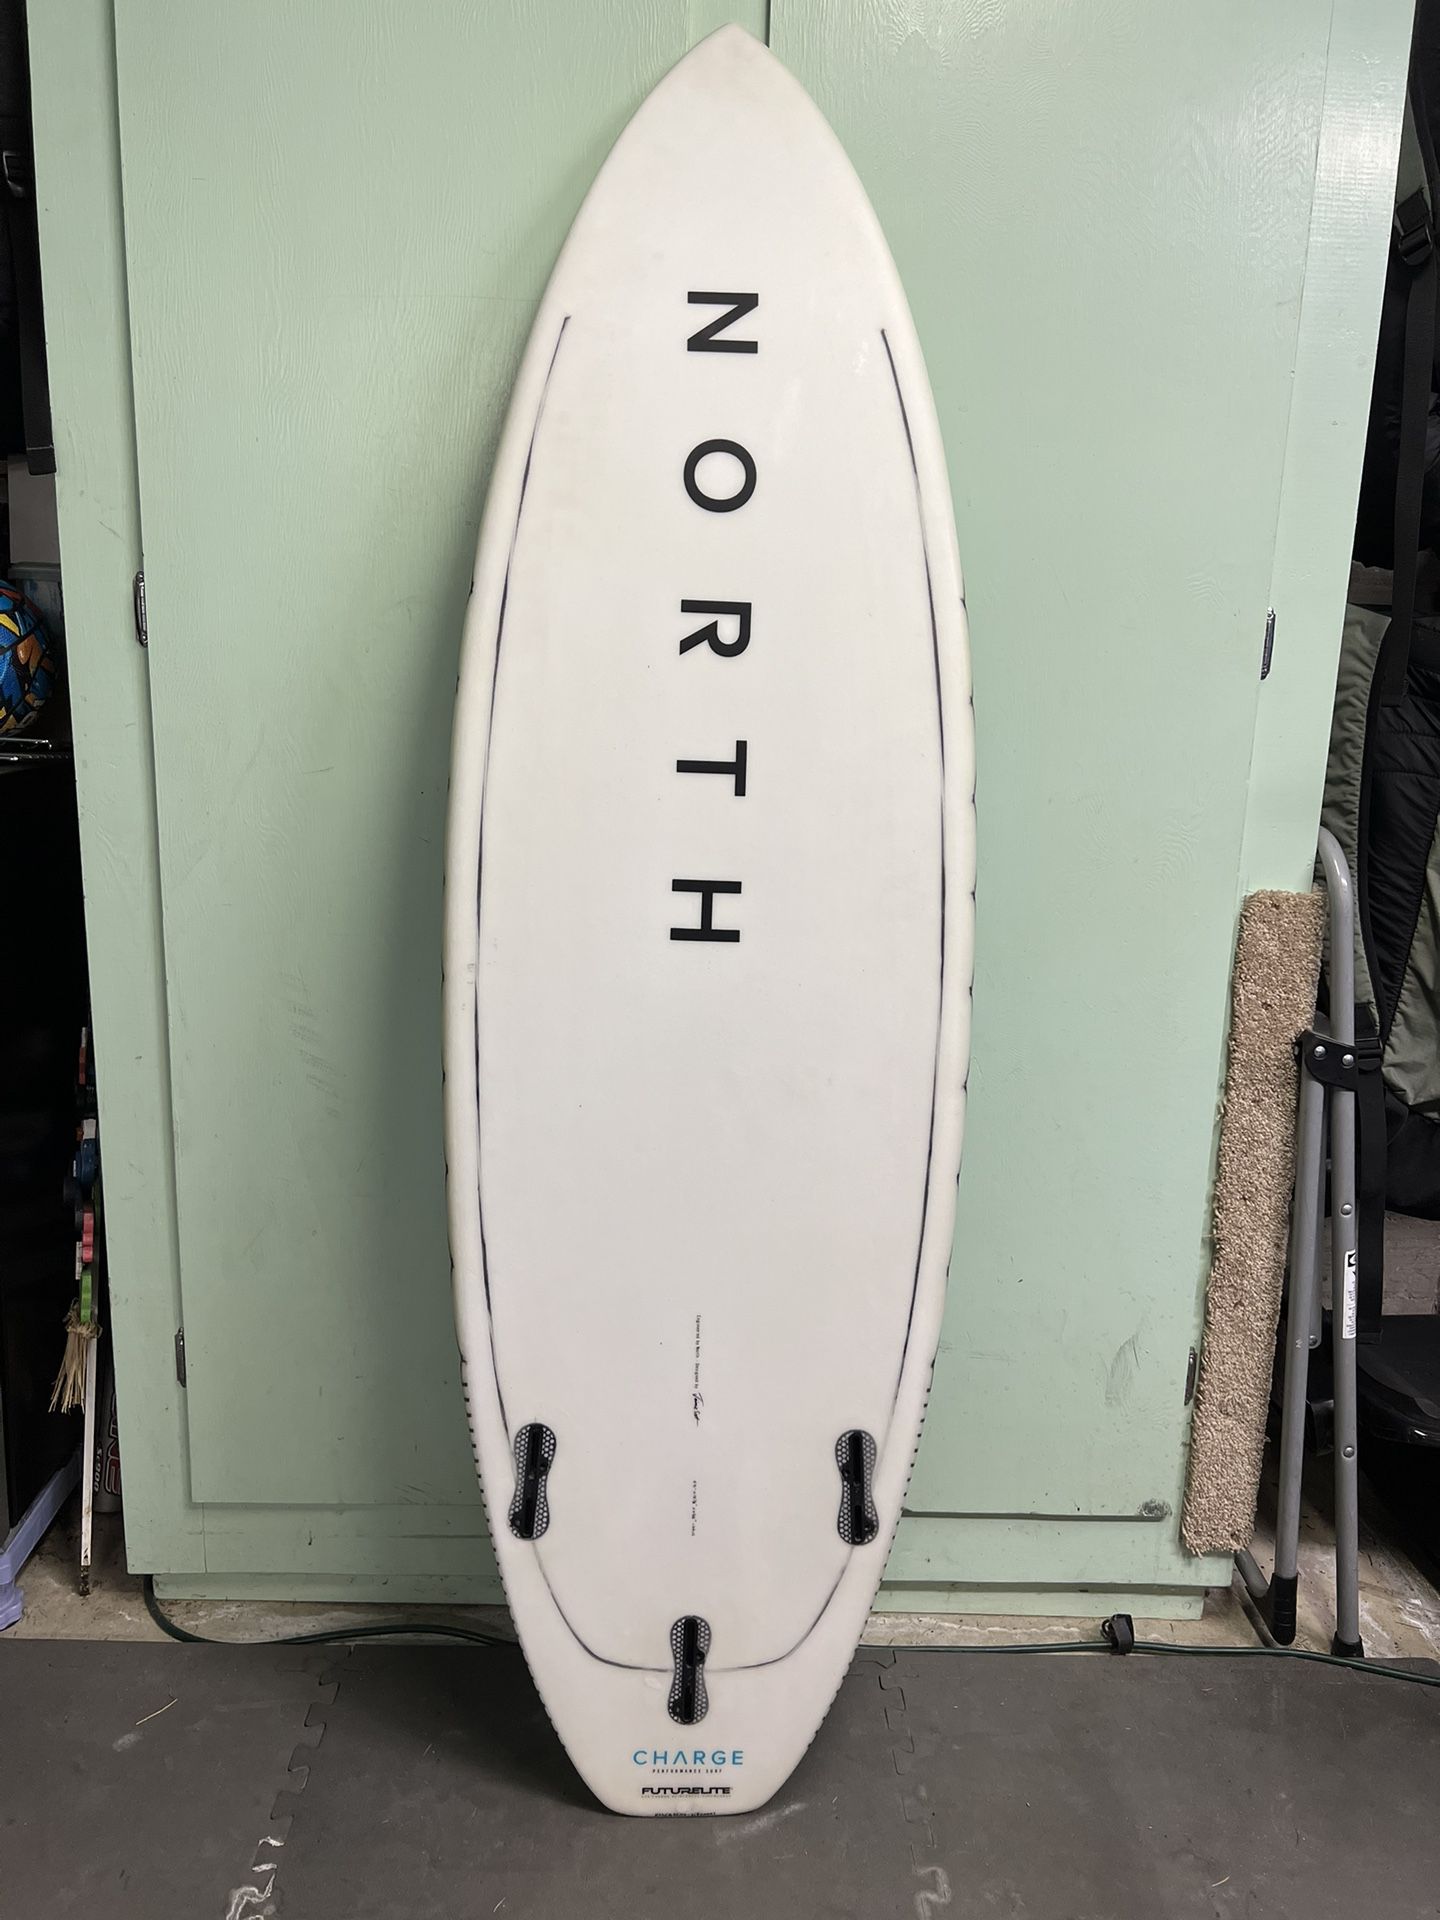 2022 North Charge 5’5” Kite Surfboard